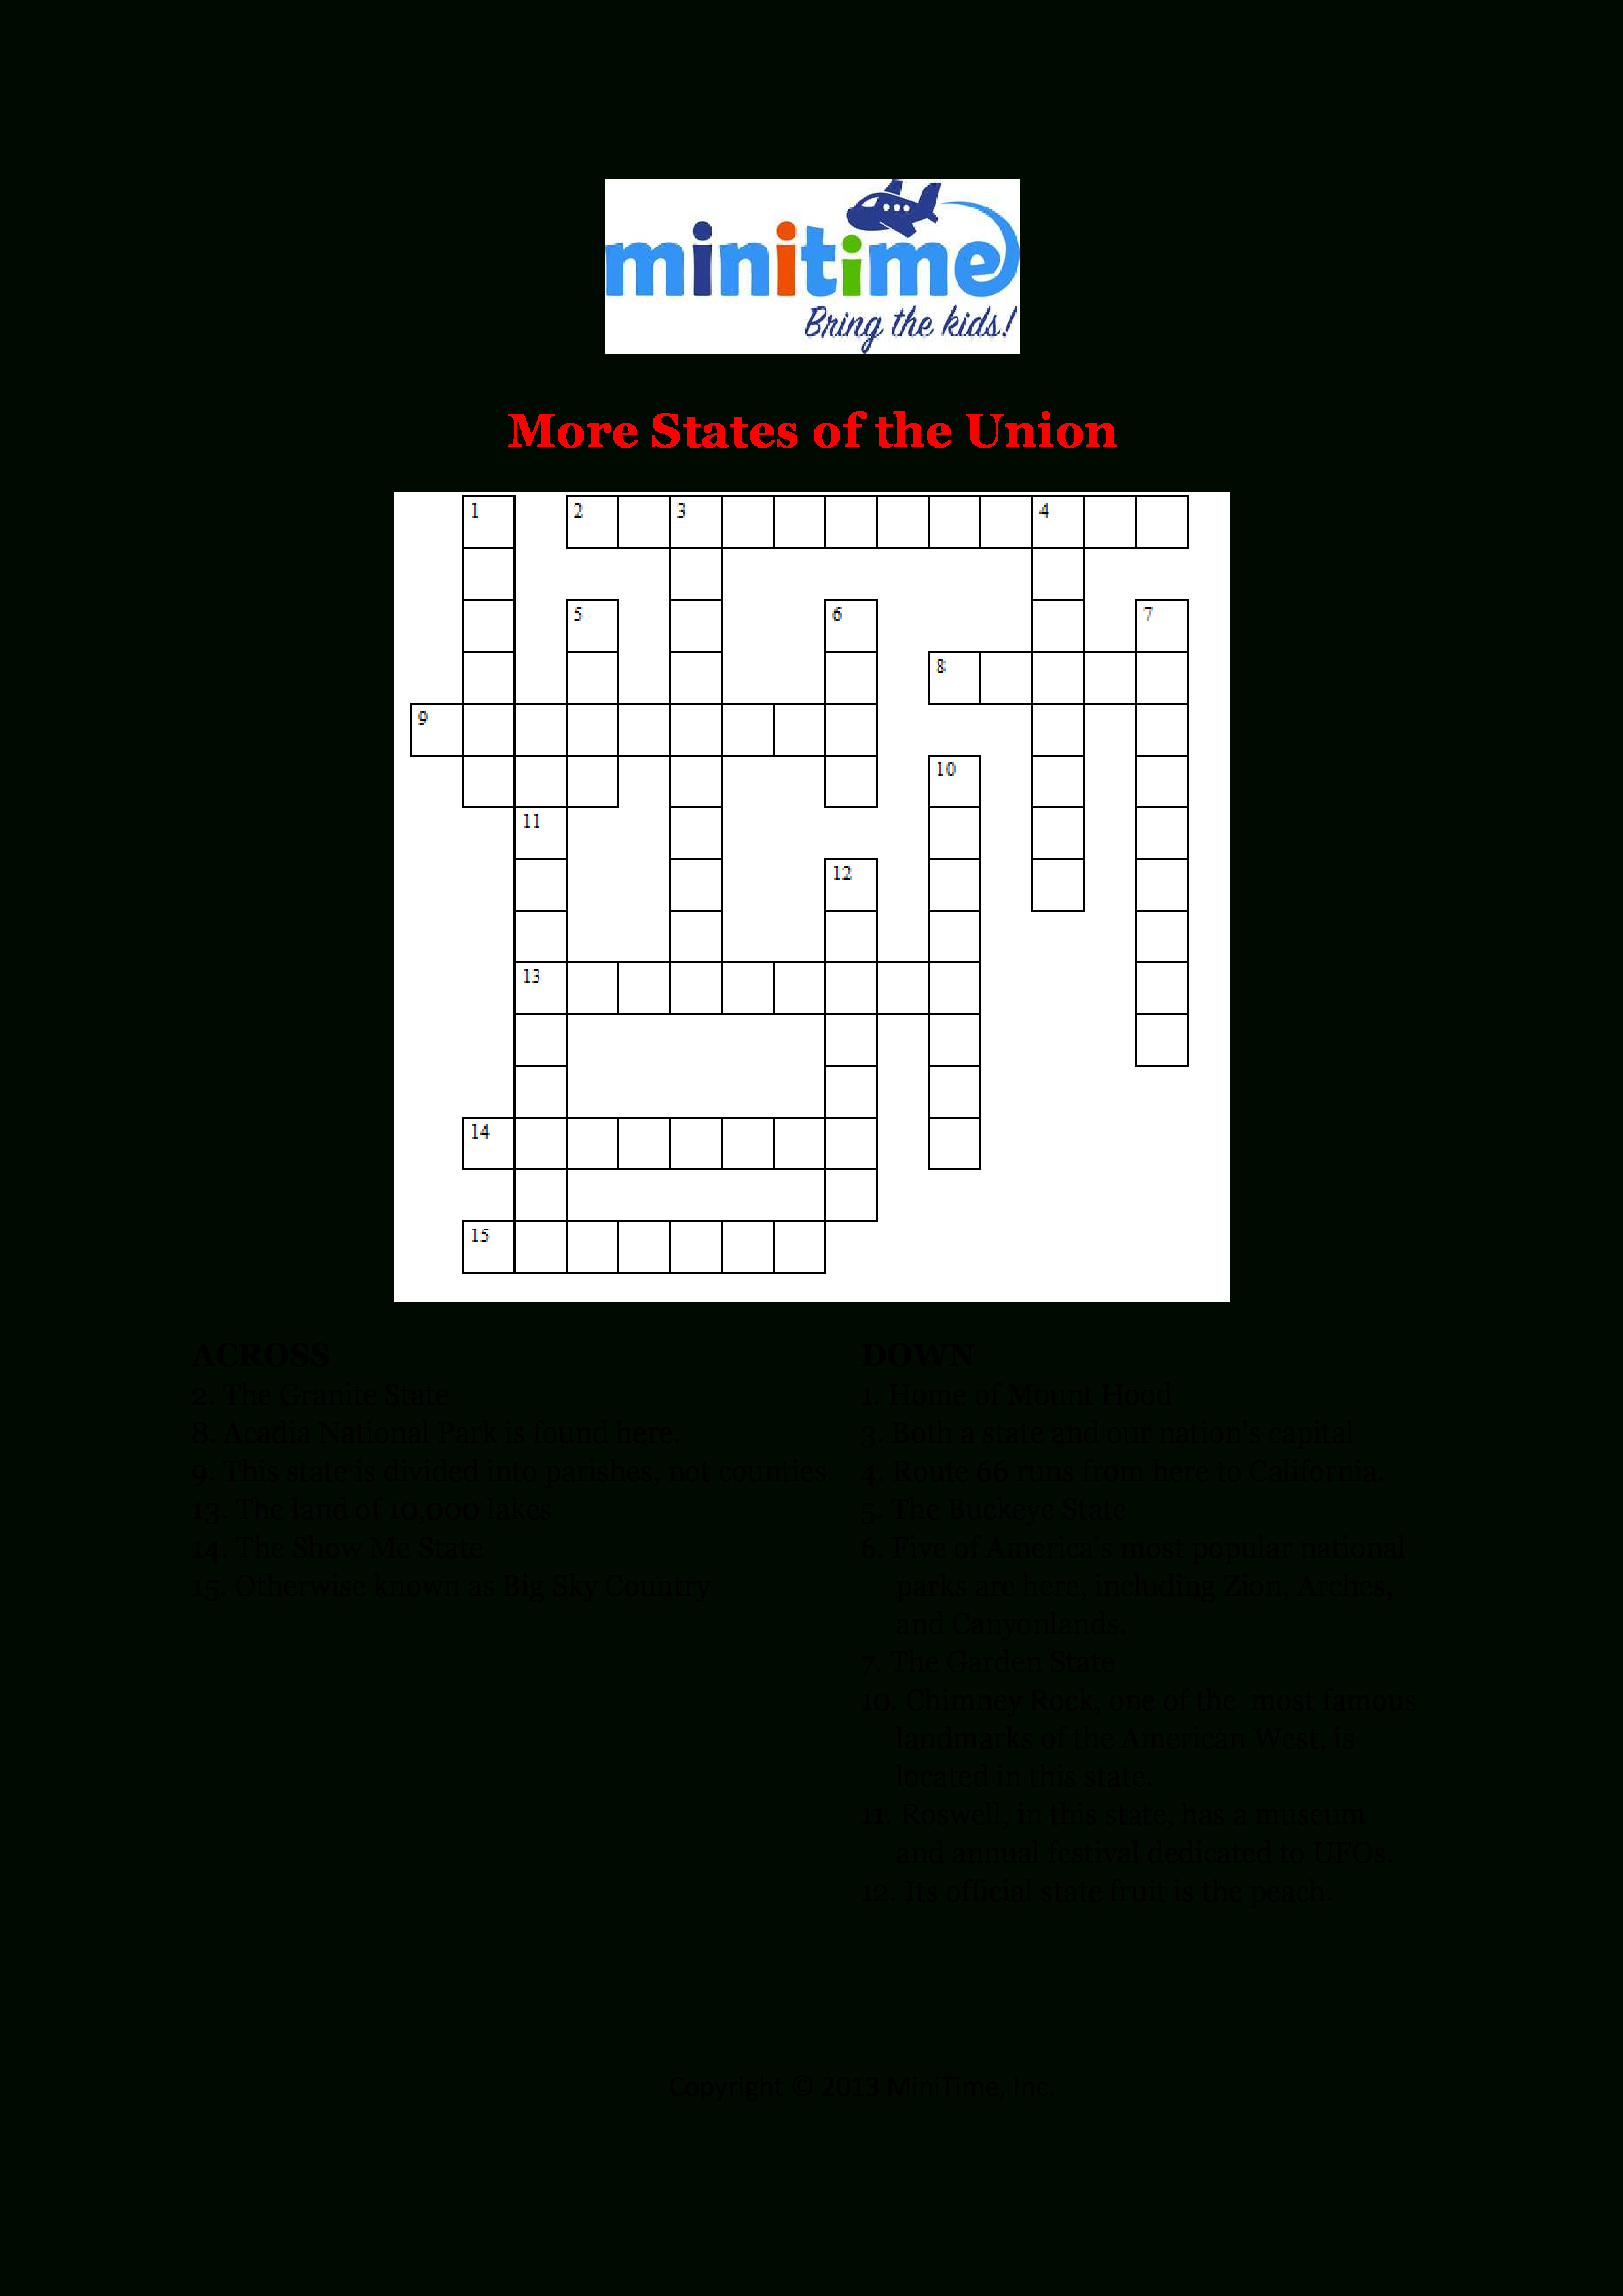 Us States Fun Facts Crossword Puzzles | Free Printable Travel - Printable Crossword Puzzles In Italian